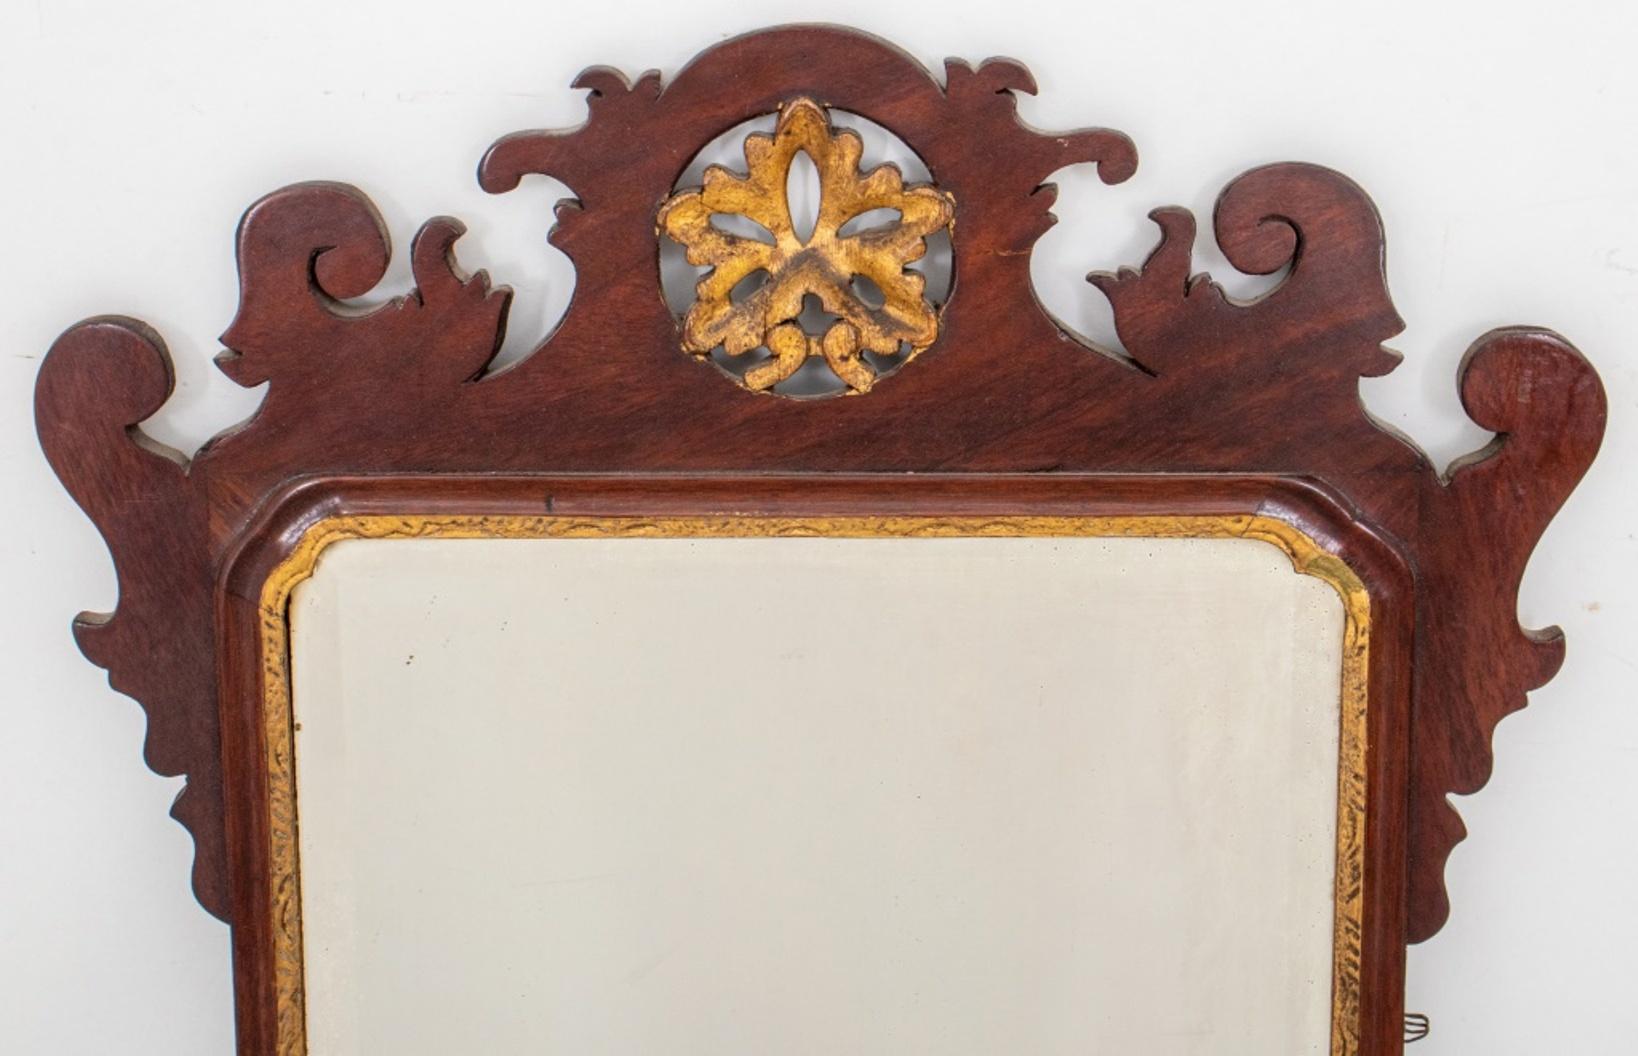 American Chippendale style mirror, parcel gilt and mahogany, centering a rectangular beveled mirror plate.

Dimensions of Mirror: 24